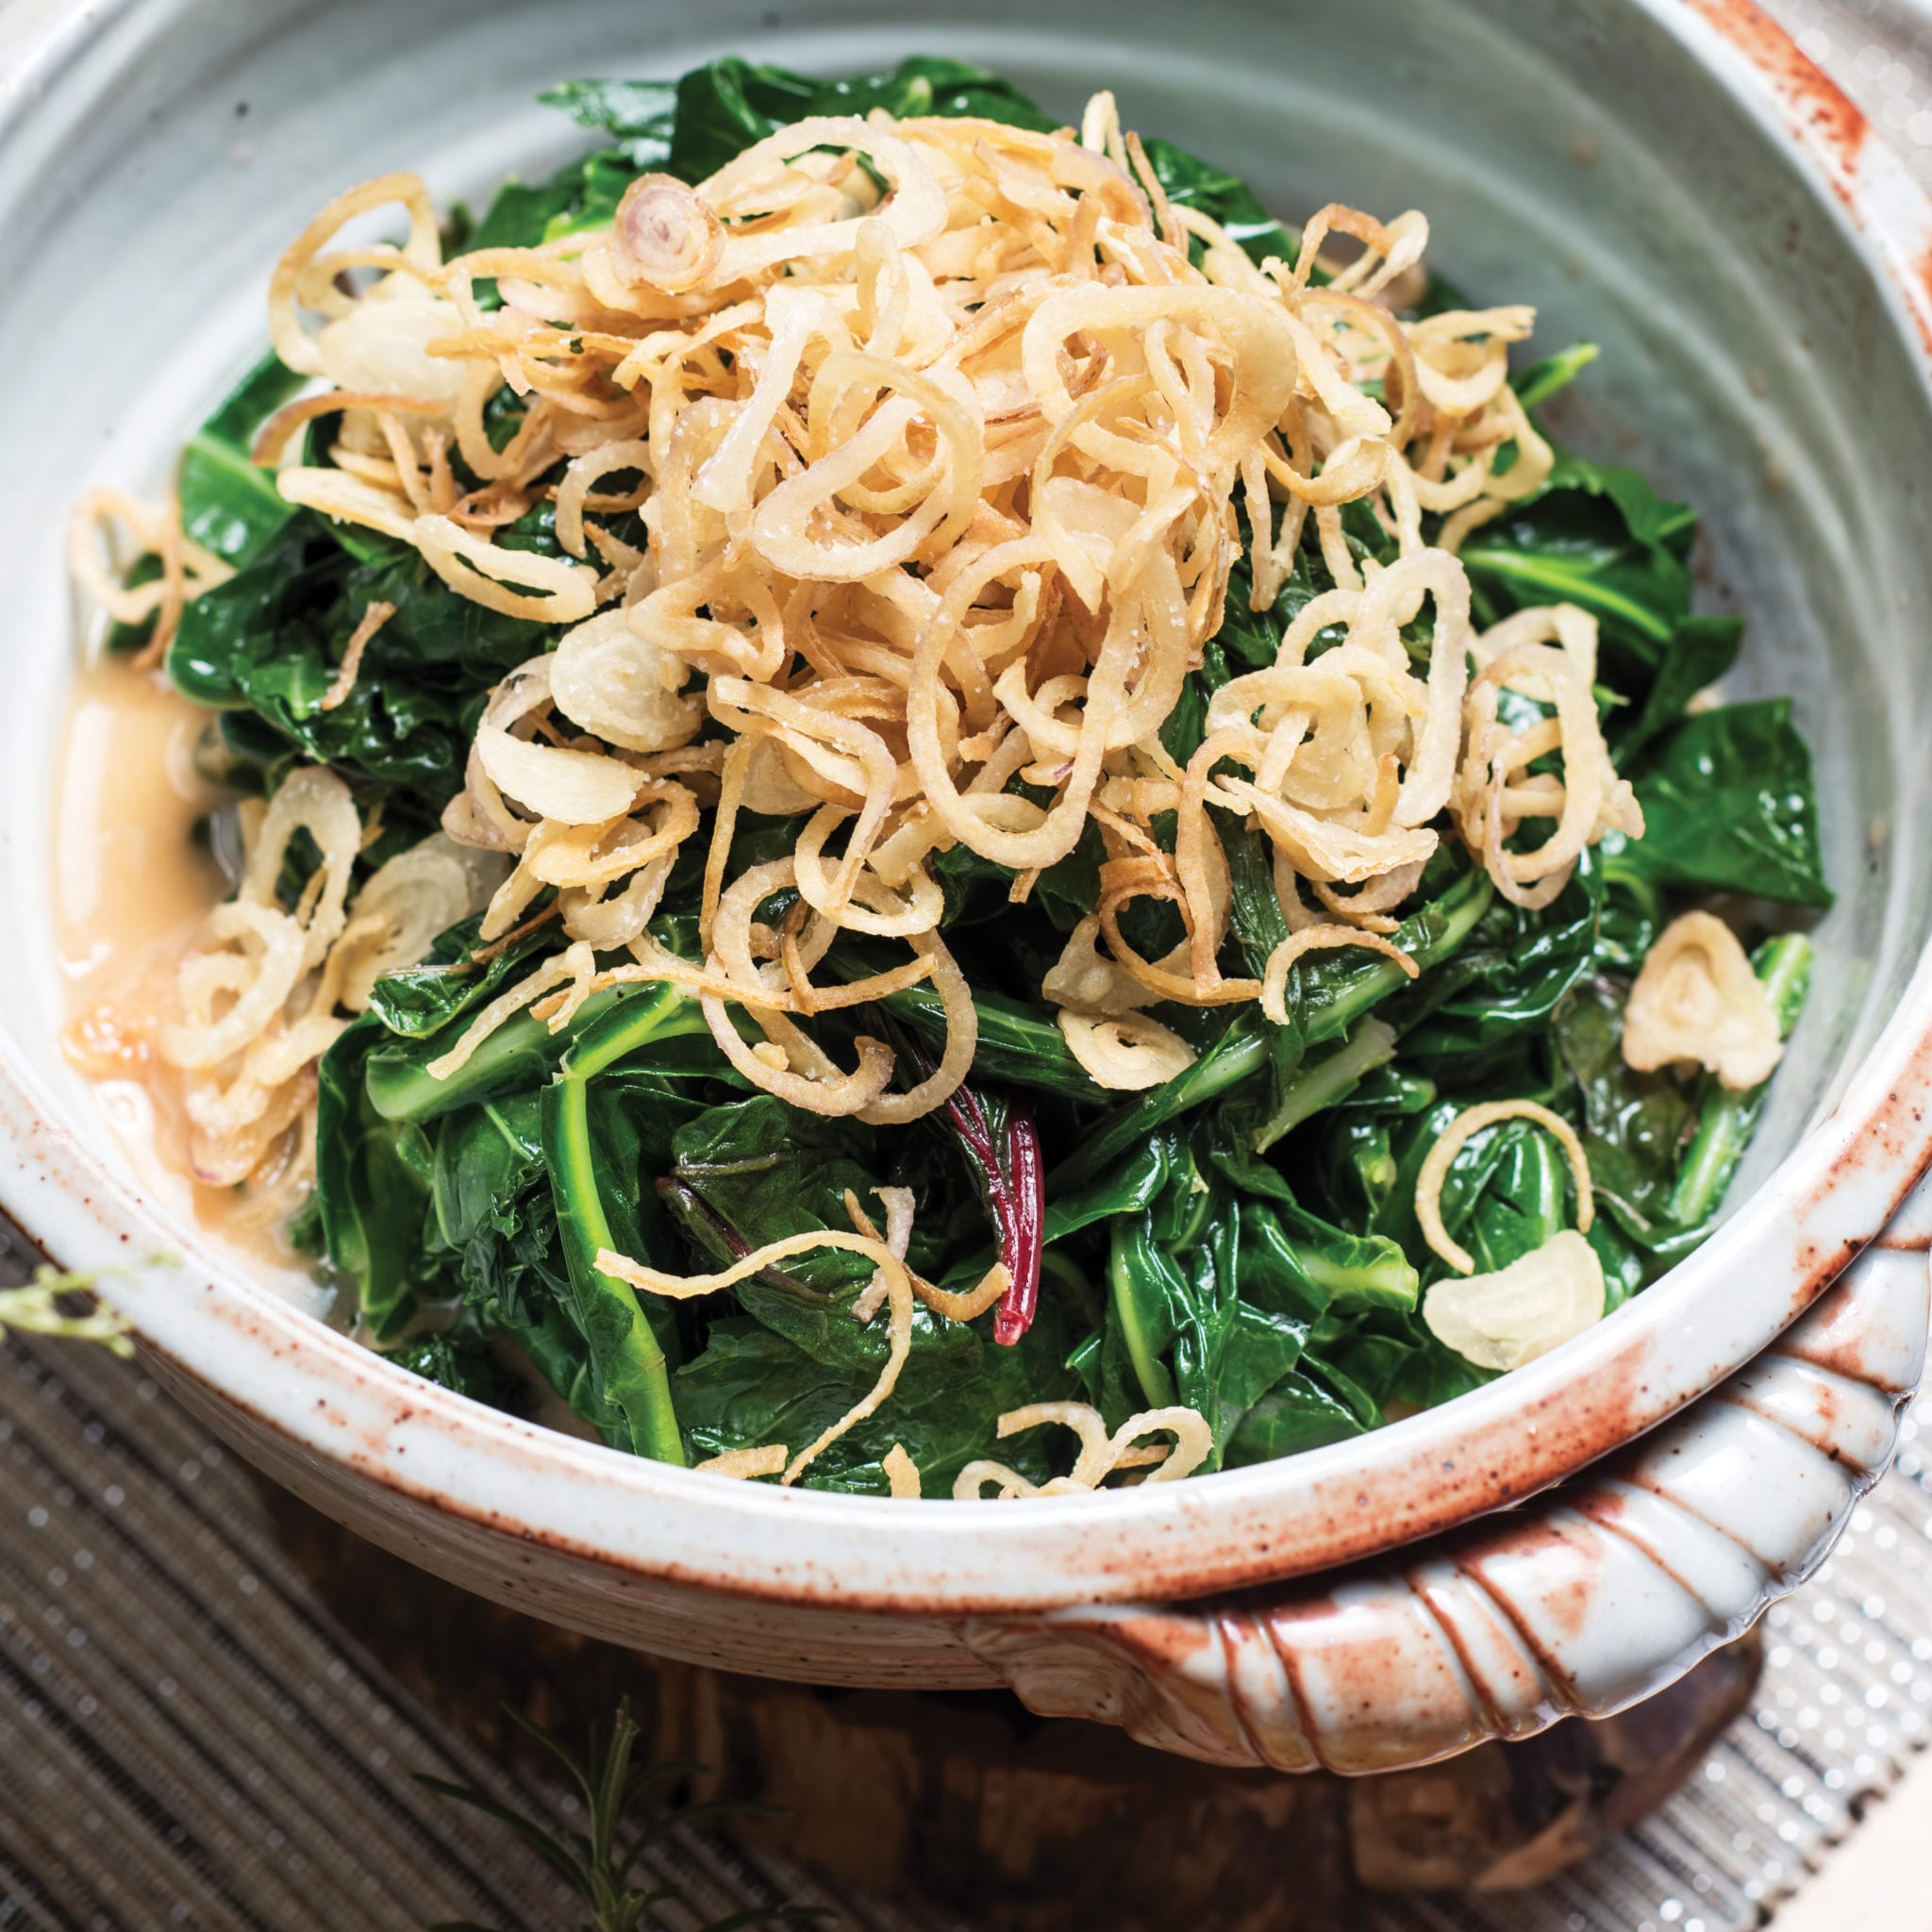 Wilted Greens with Shallot Jam and Fried Shallots